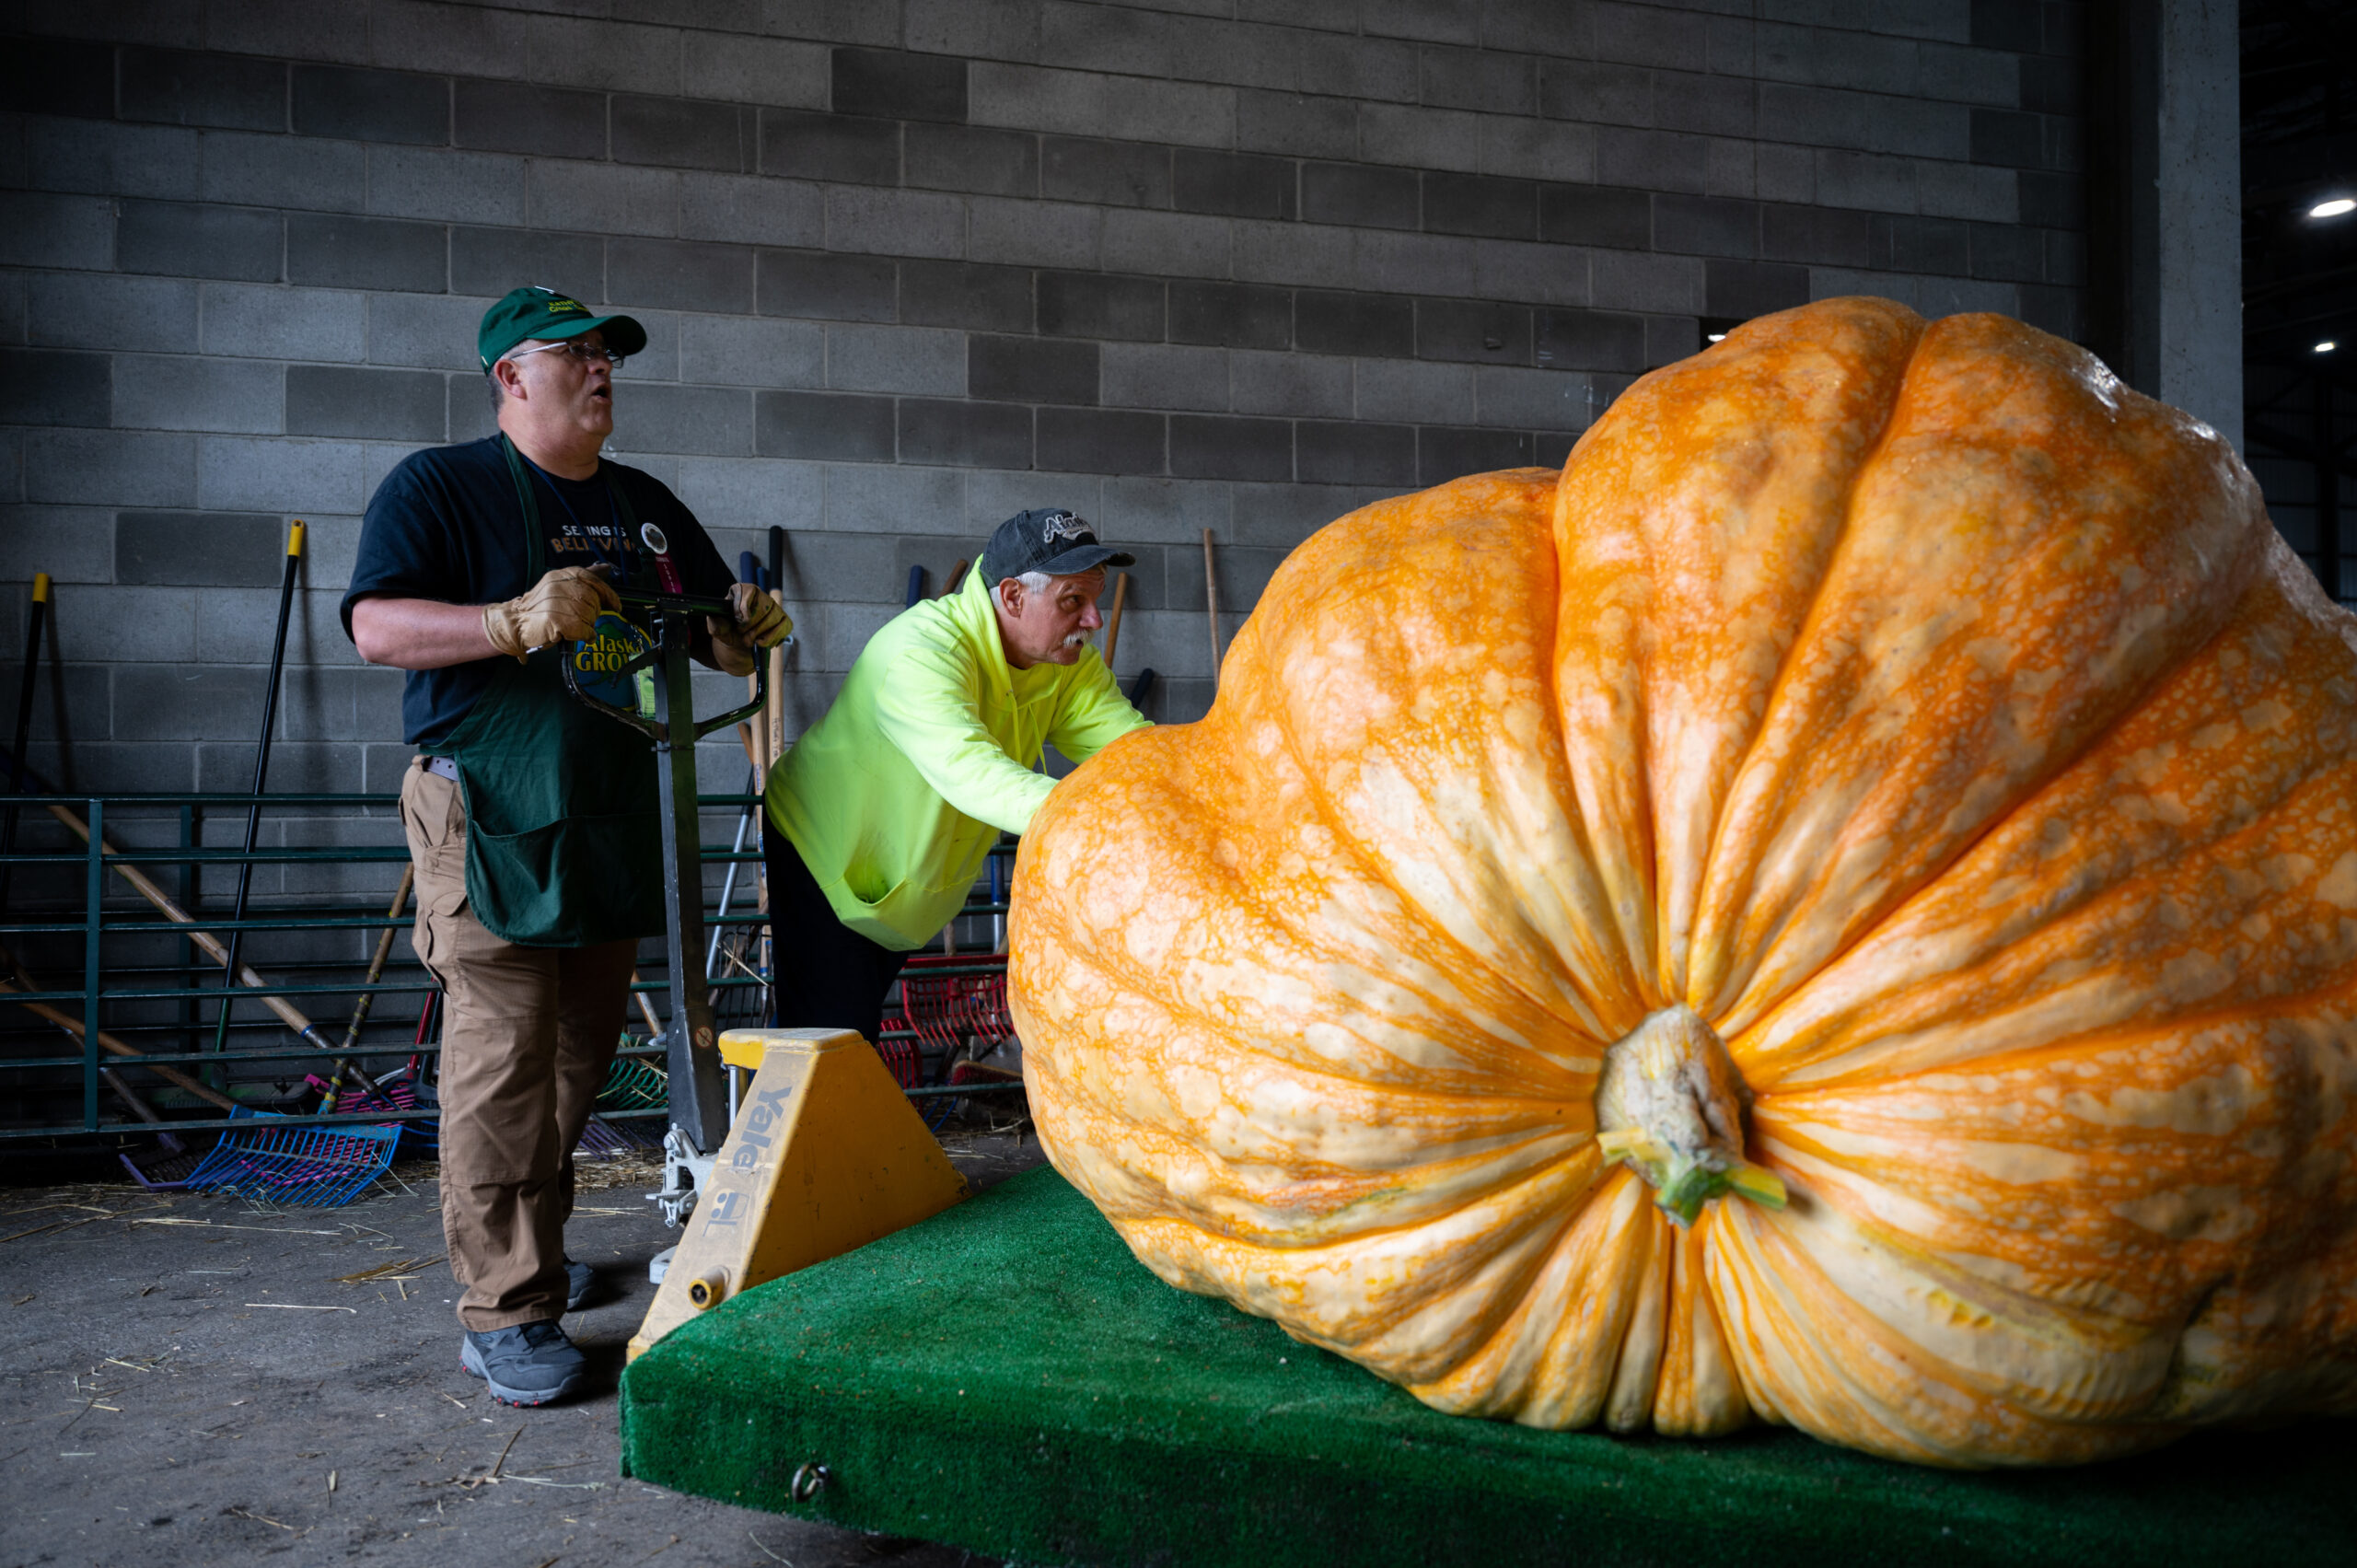 Two men push a giant pumpkin on a forklift.